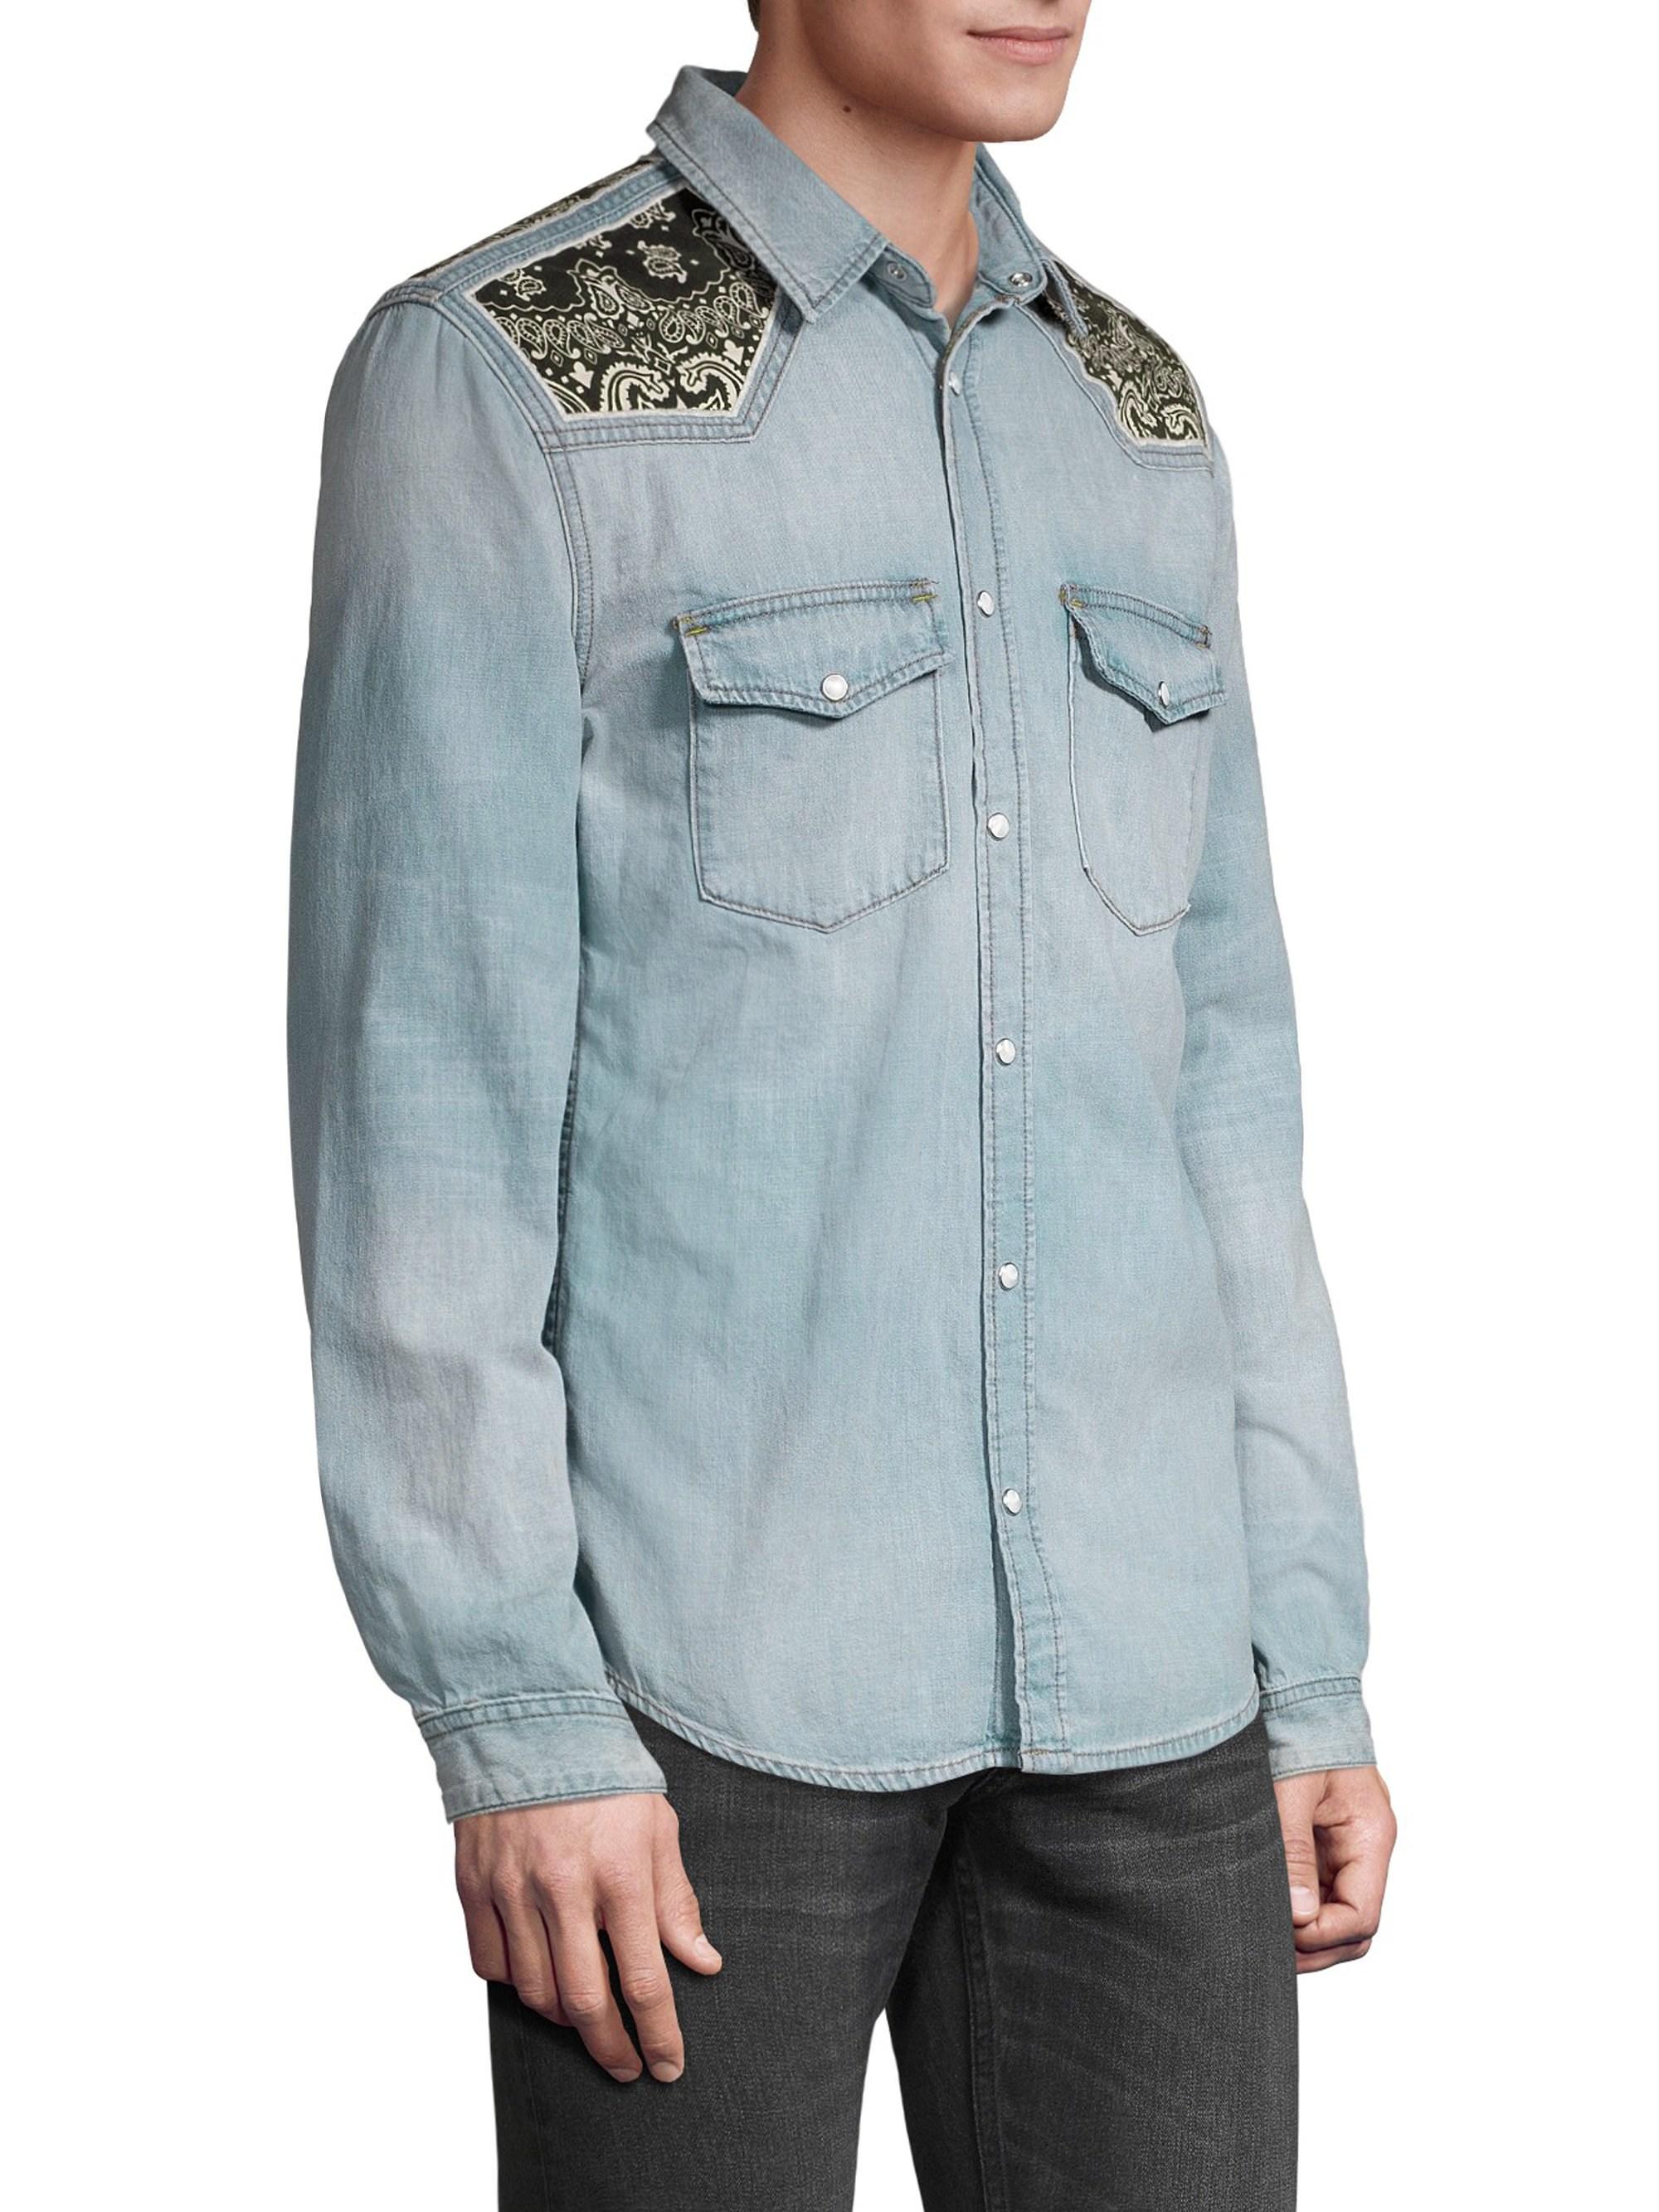 The Kooples Paisley Patch Denim Shirt in Blue for Men - Lyst